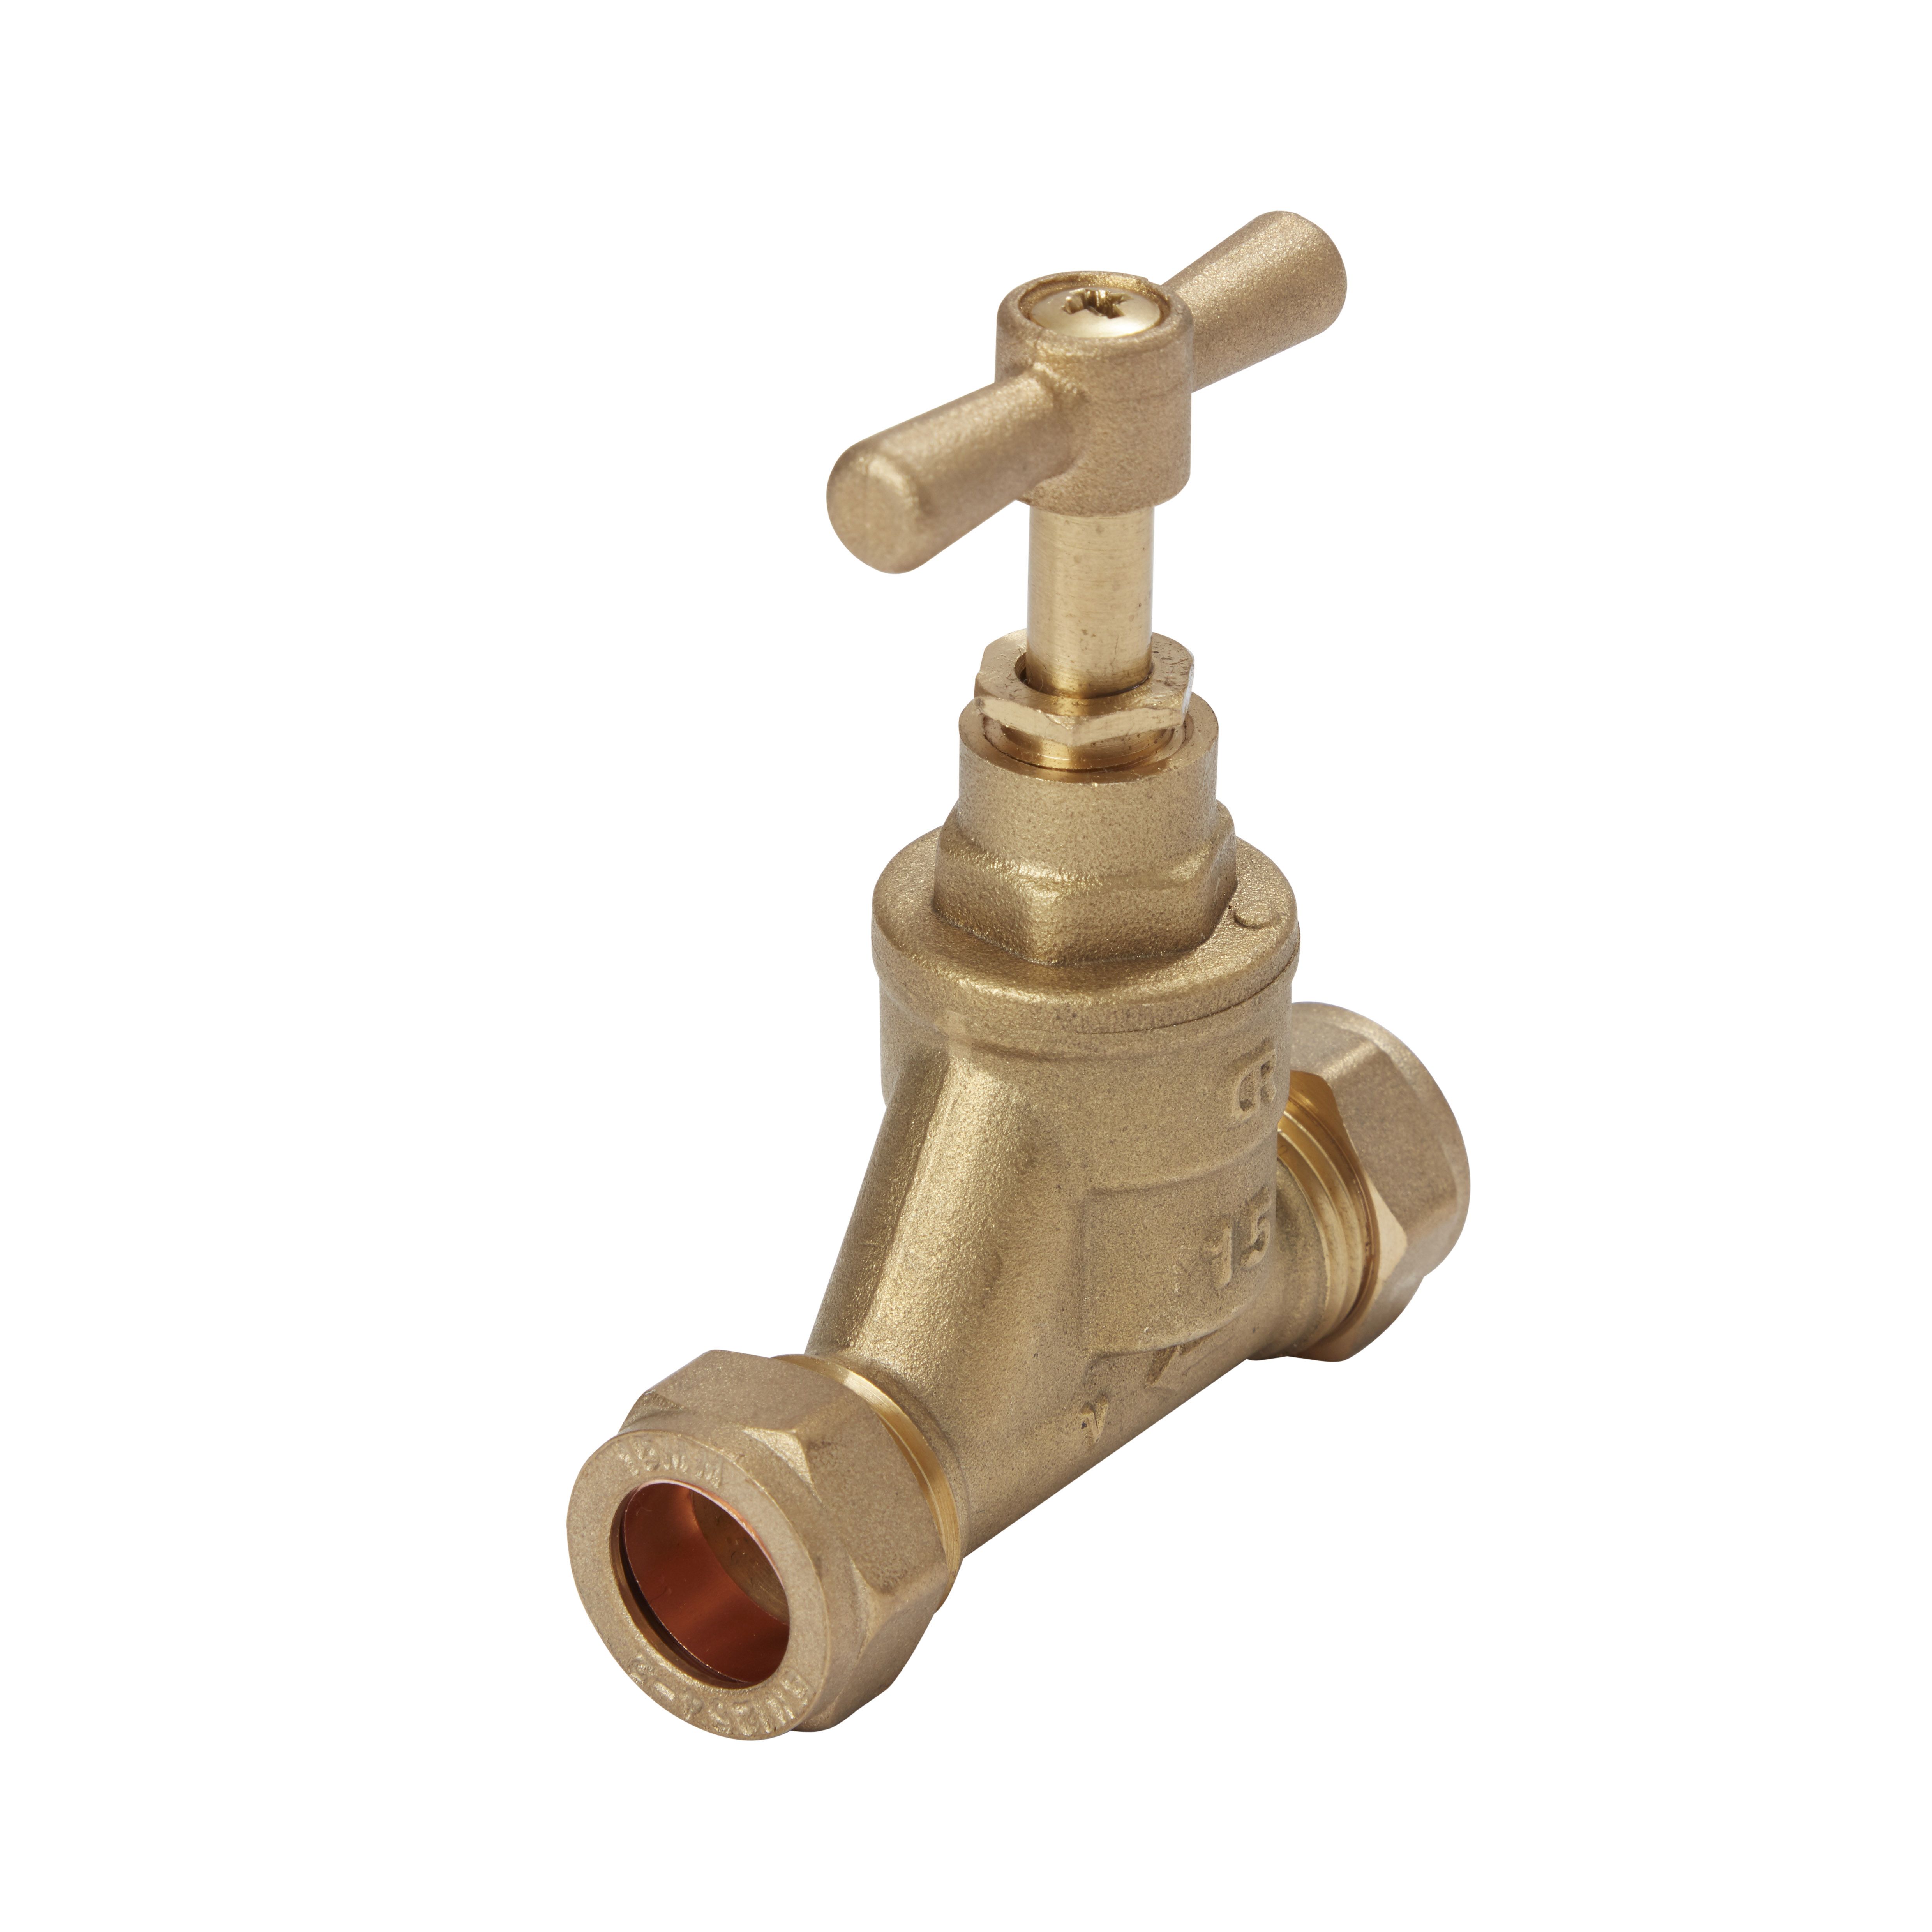 Plumbsure Brass Compression Equal Tee (Dia) 15mm x 15mm x 15mm, Pack of 10